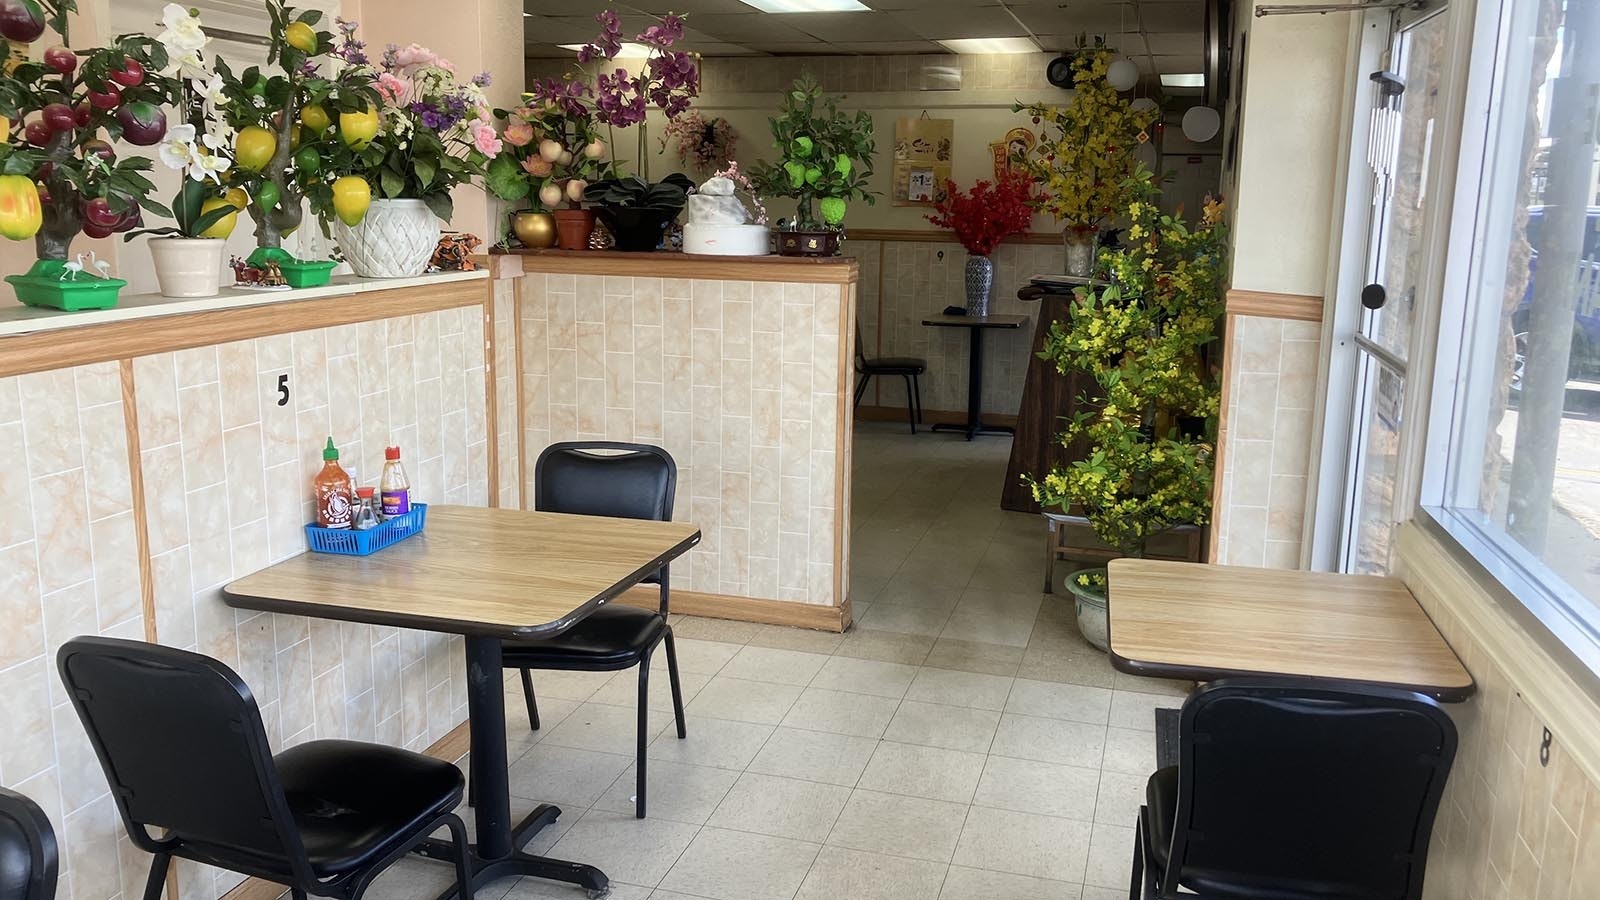 Pho Saigon has seating for just more than 20 people with individual tables.